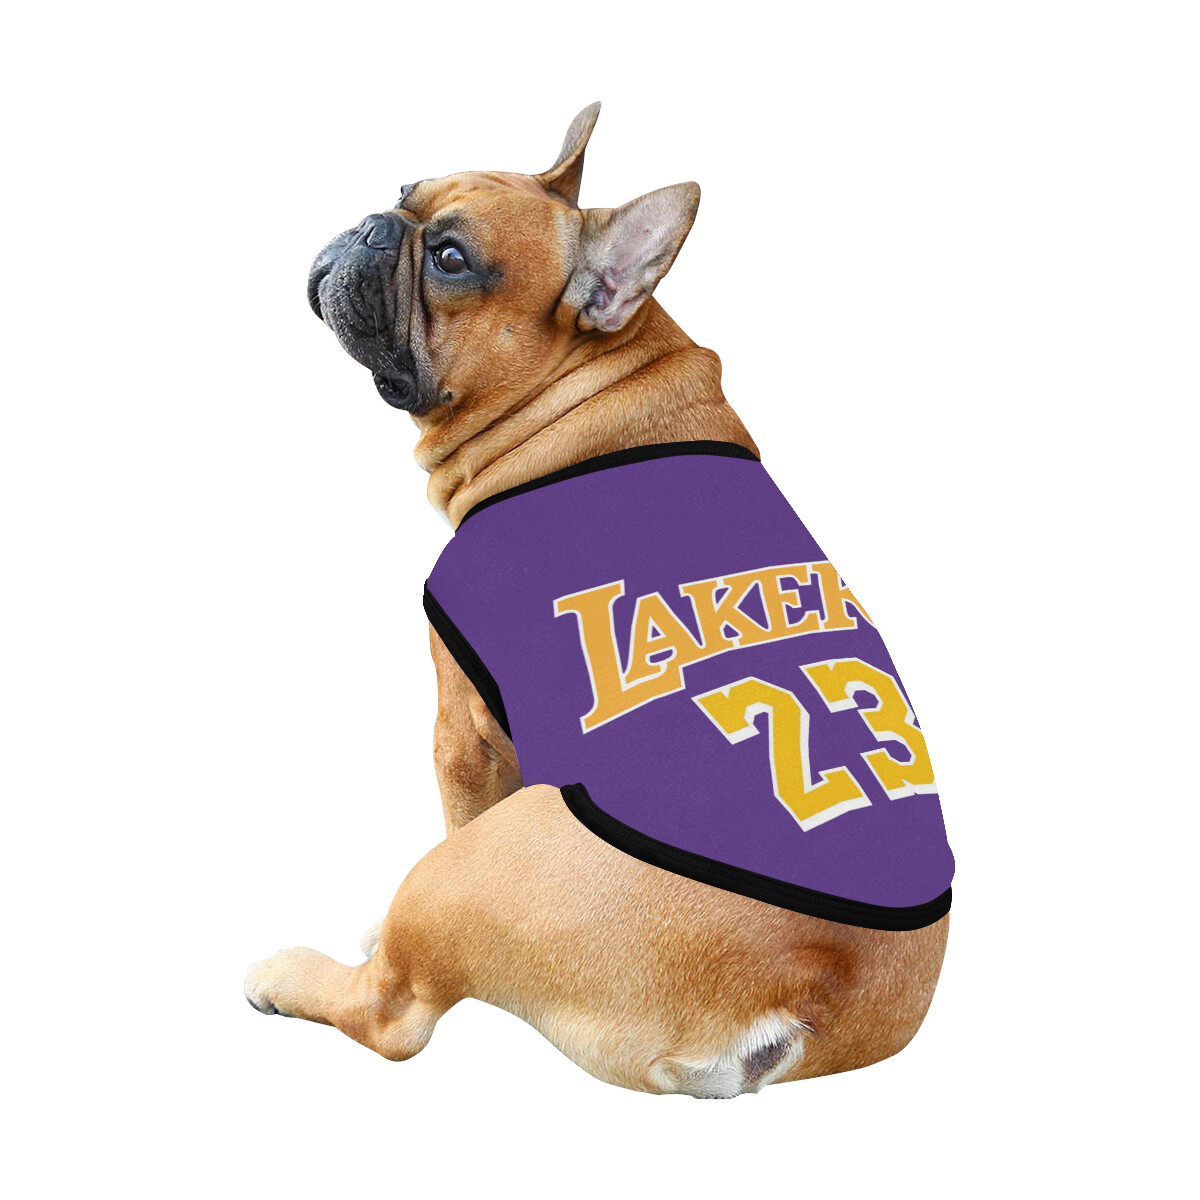 🐕 Lakers Lebron James 23 Dog shirt, Dog Tank Top, Dog t-shirt, Dog clothes, Gifts, front back print, 7 sizes XS to 3XL, dog gifts, purple